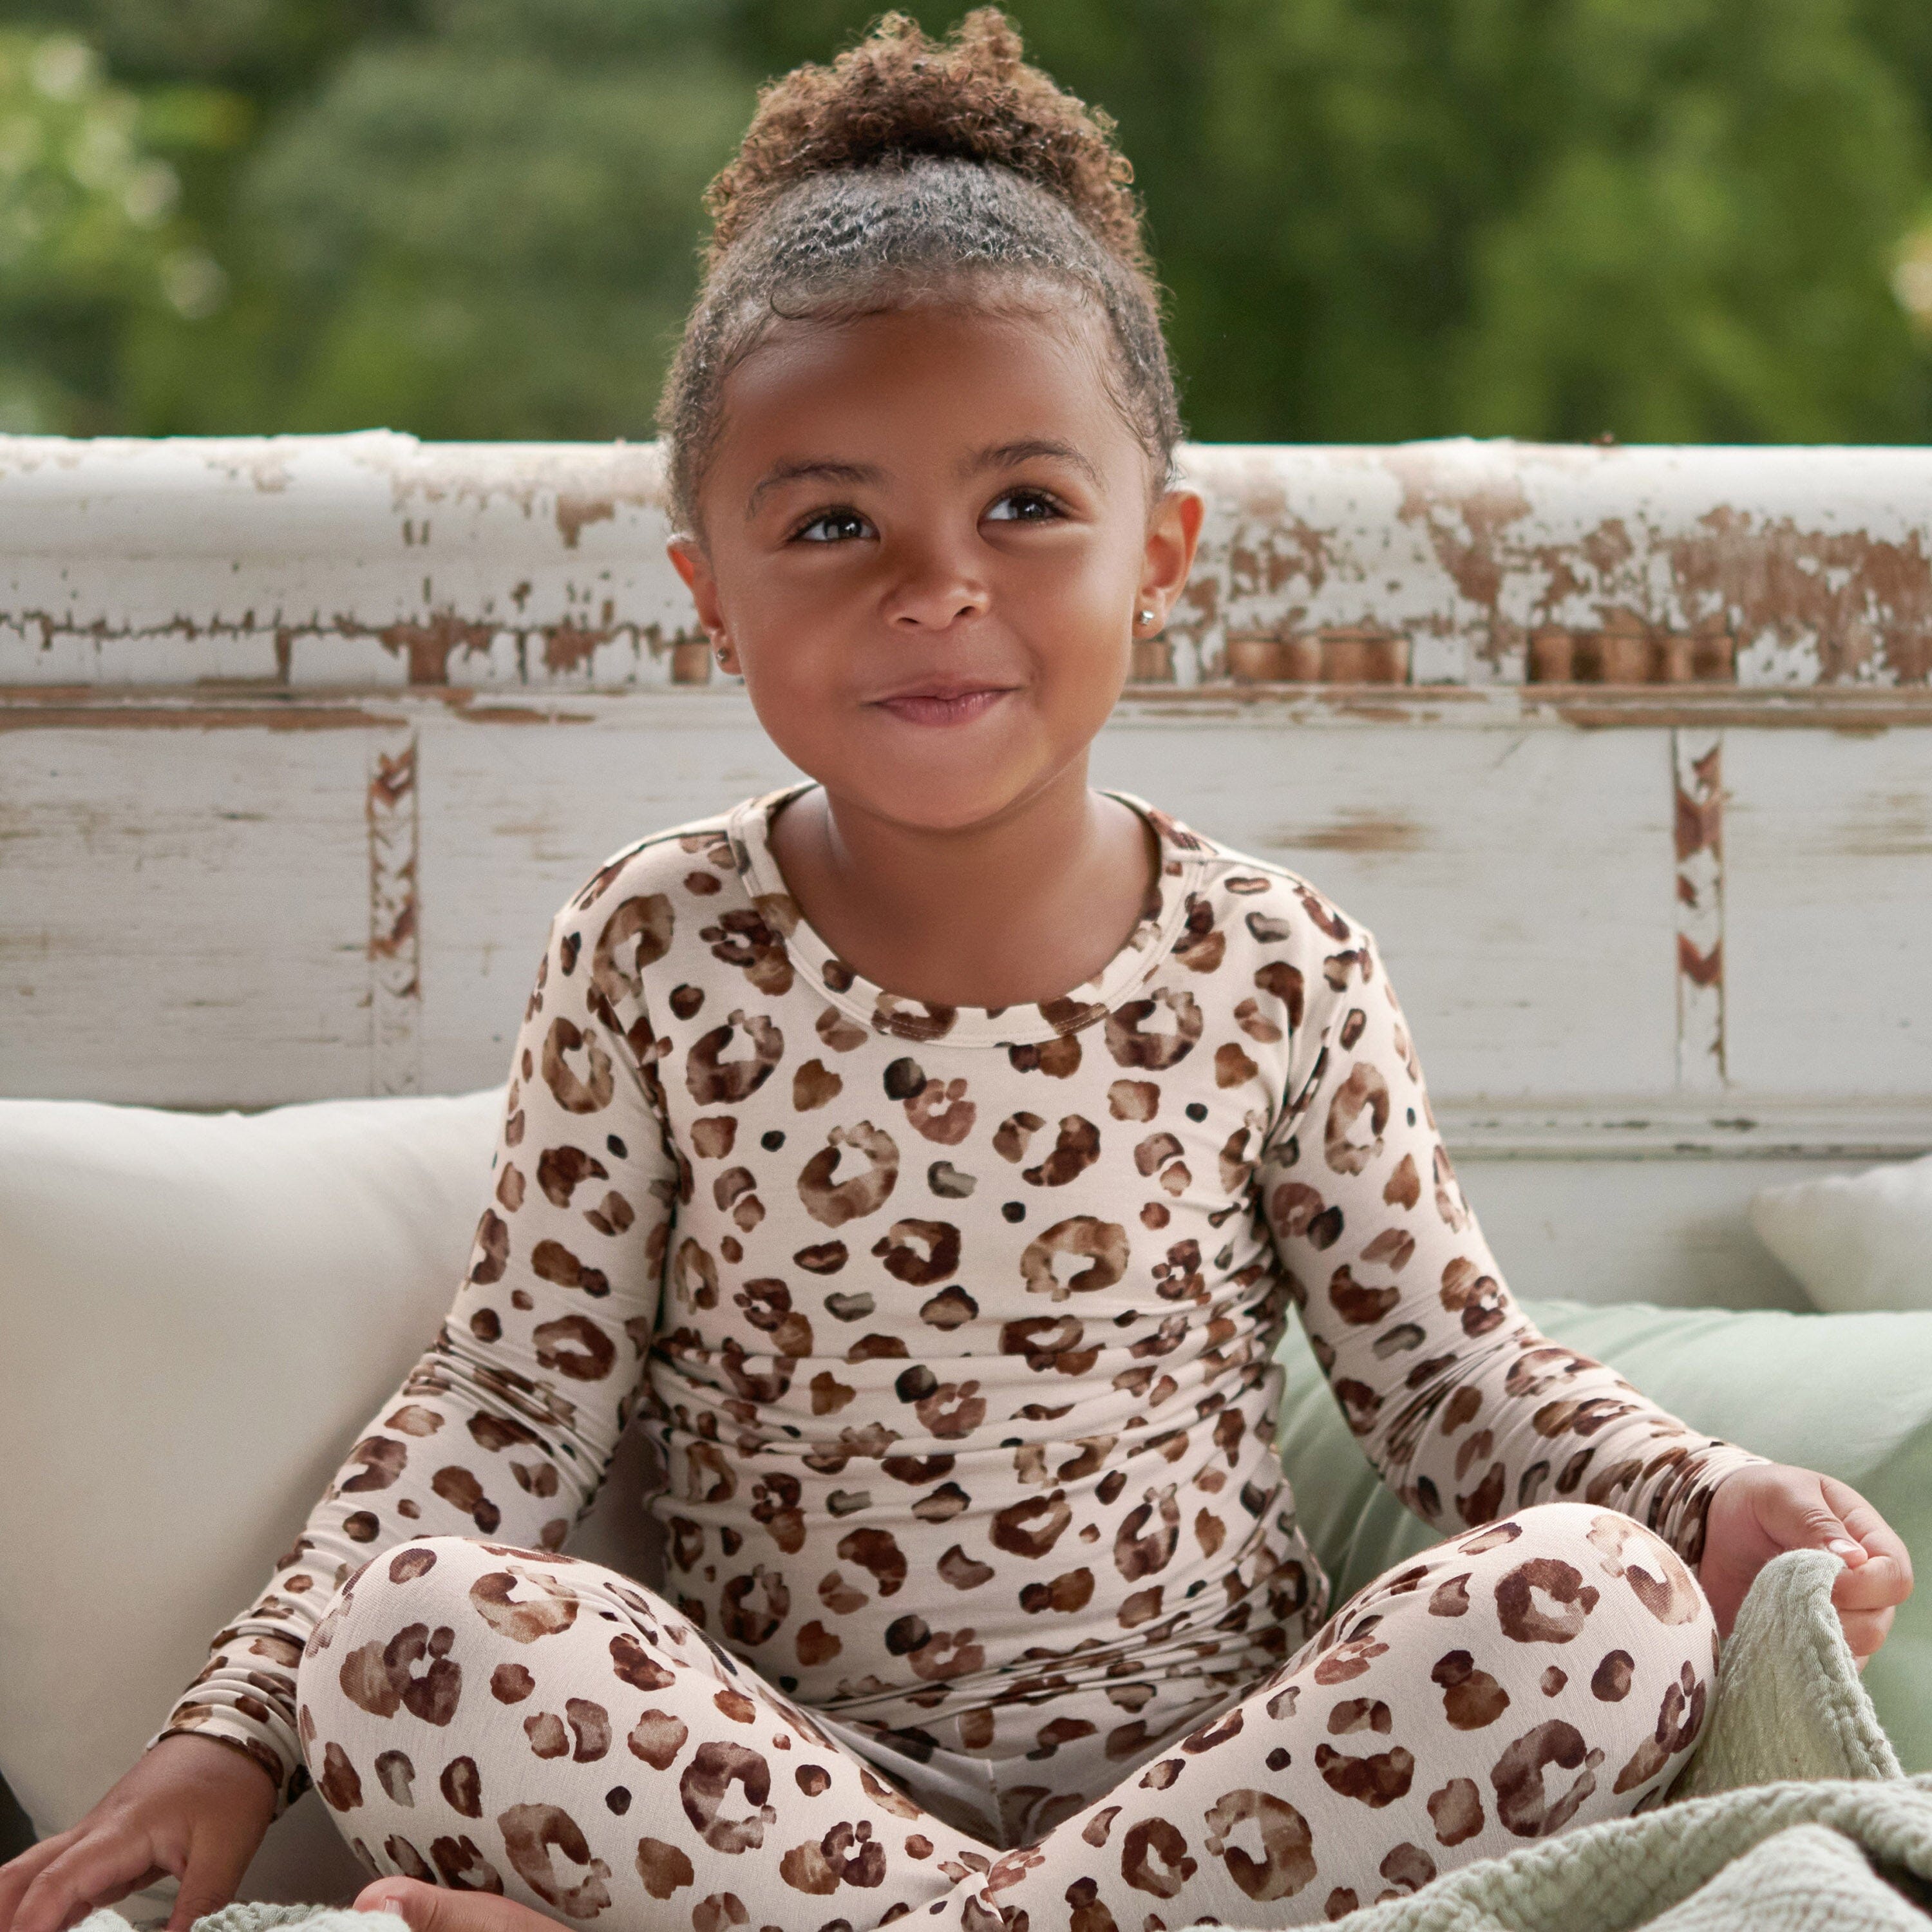 2-piece Baby / Toddler Girl Letter Solid Long-sleeve Top and Leopard Print Pants Set